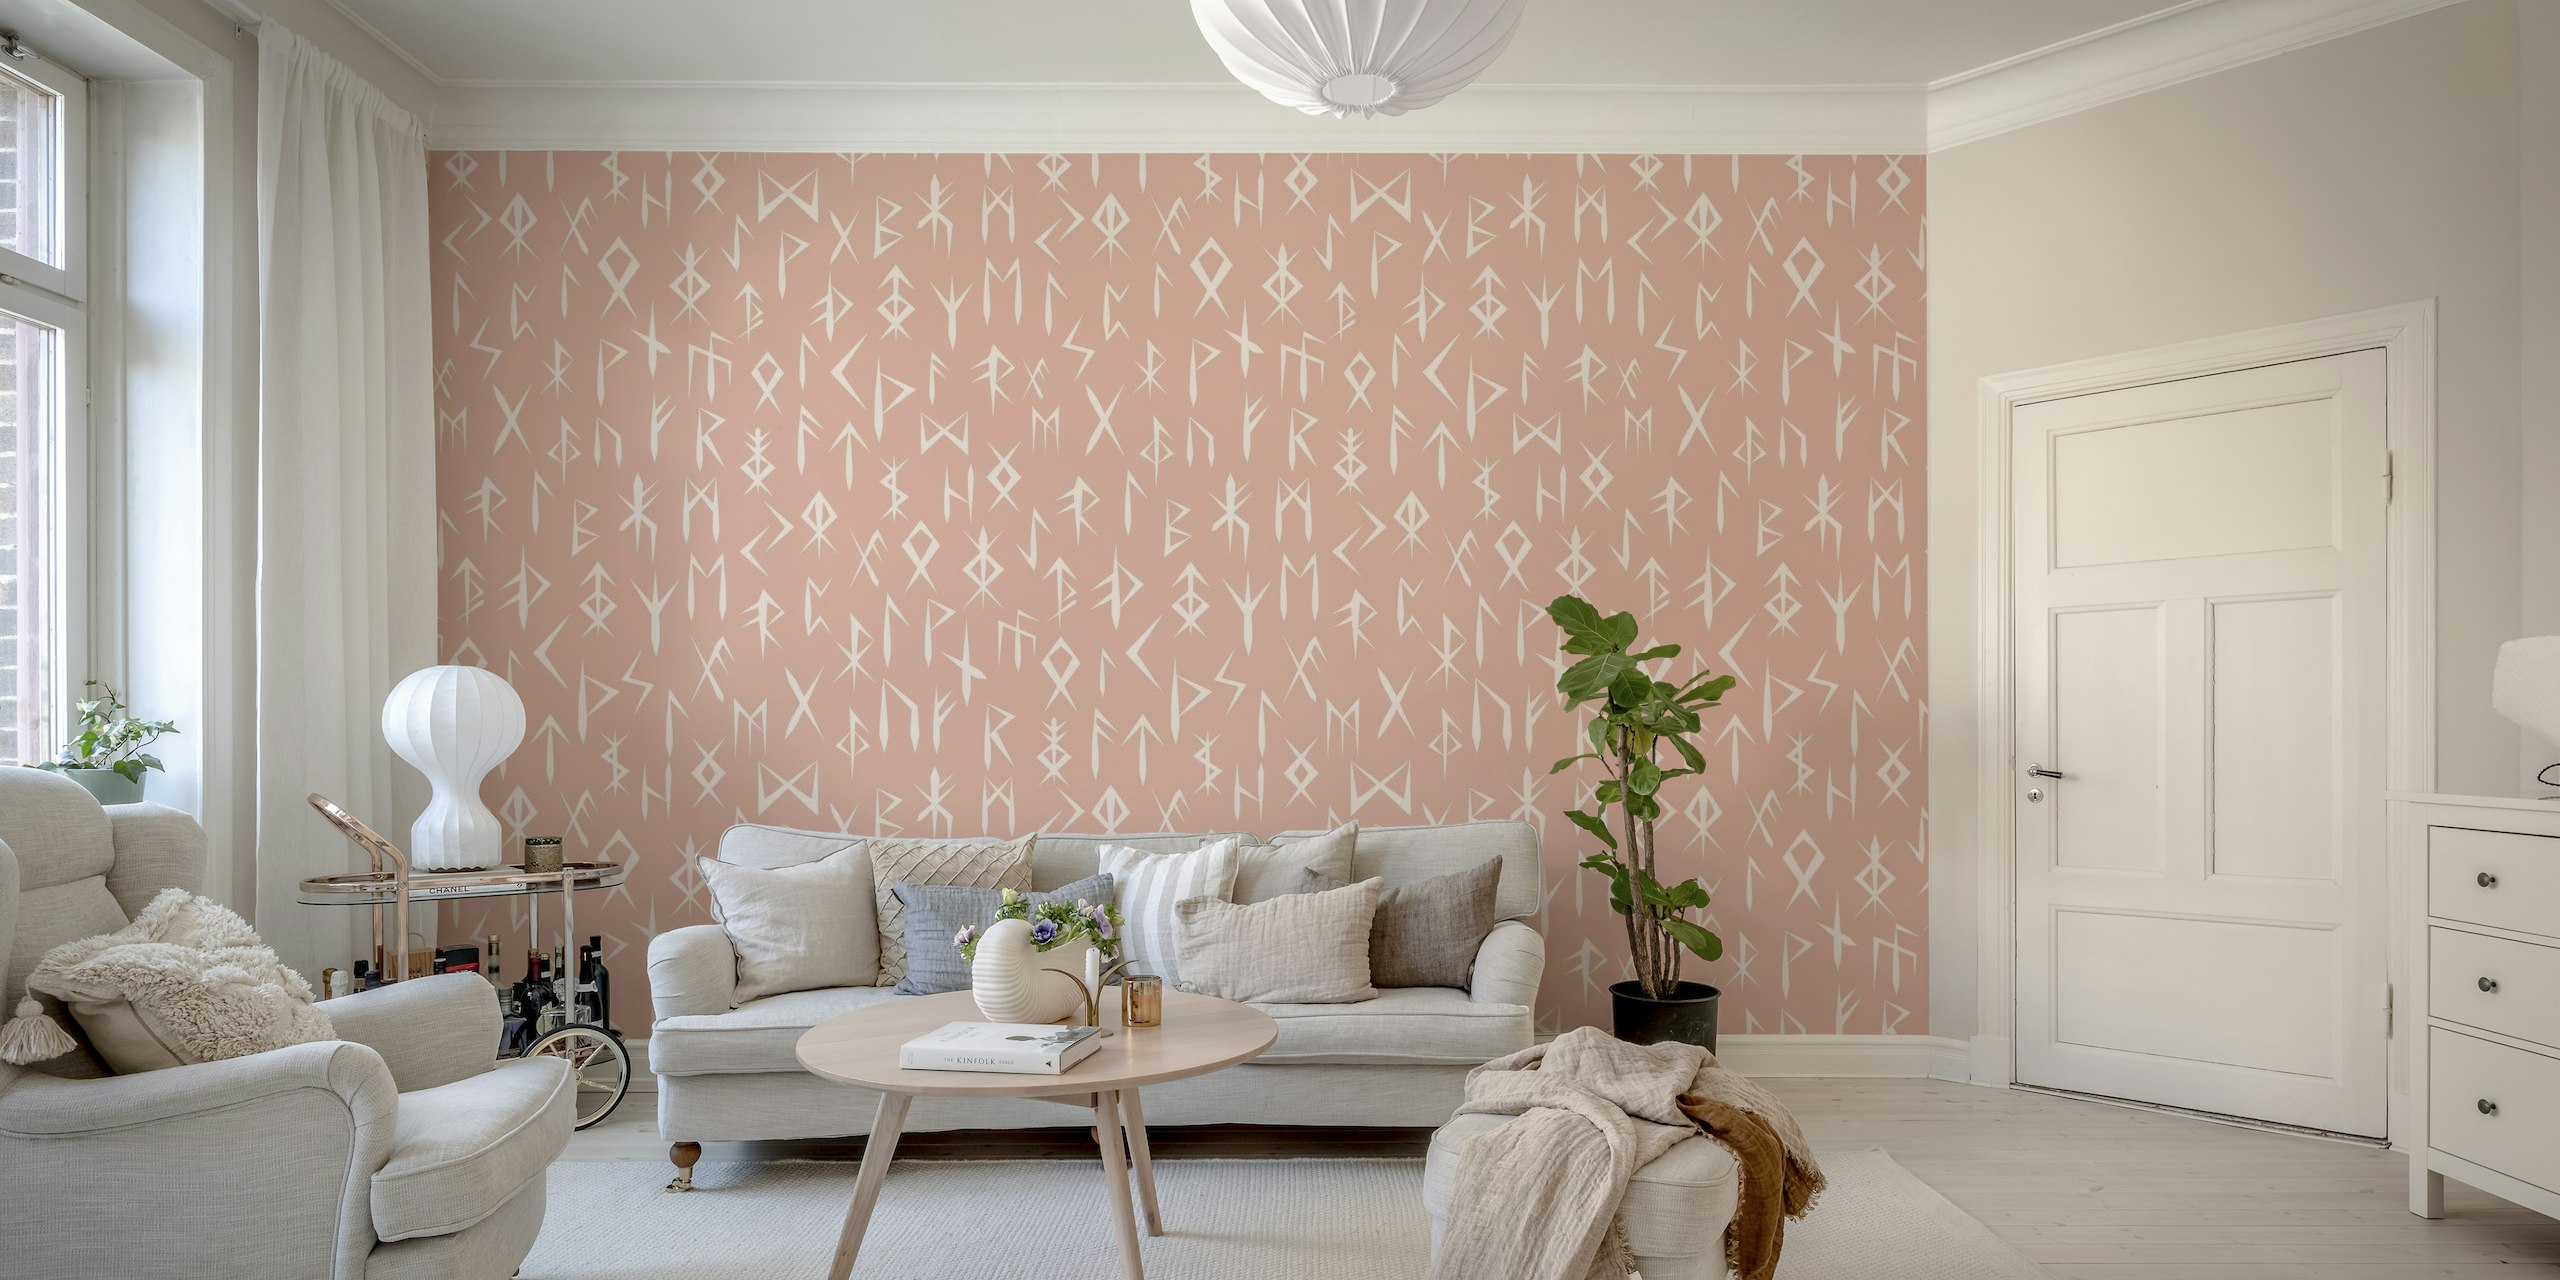 Nordic runes wall mural with a warm neutral color scheme